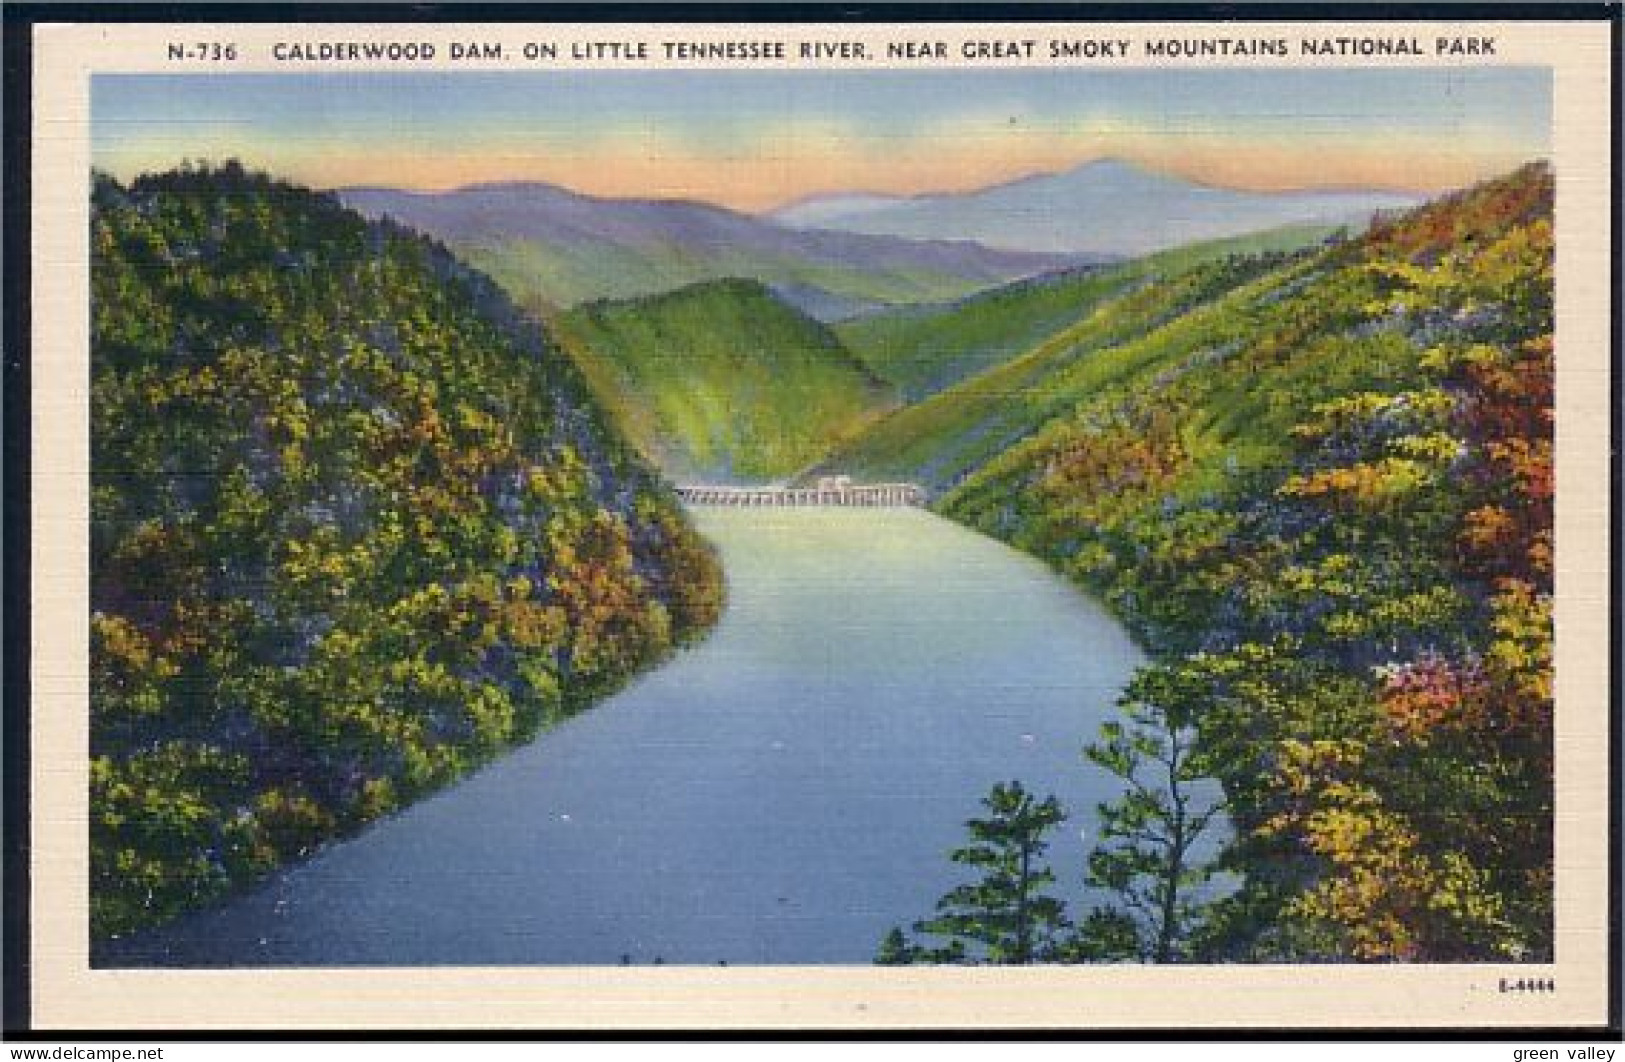 A45 318 PC Calderwood Dam On Little Tennessee River Unused - Smokey Mountains